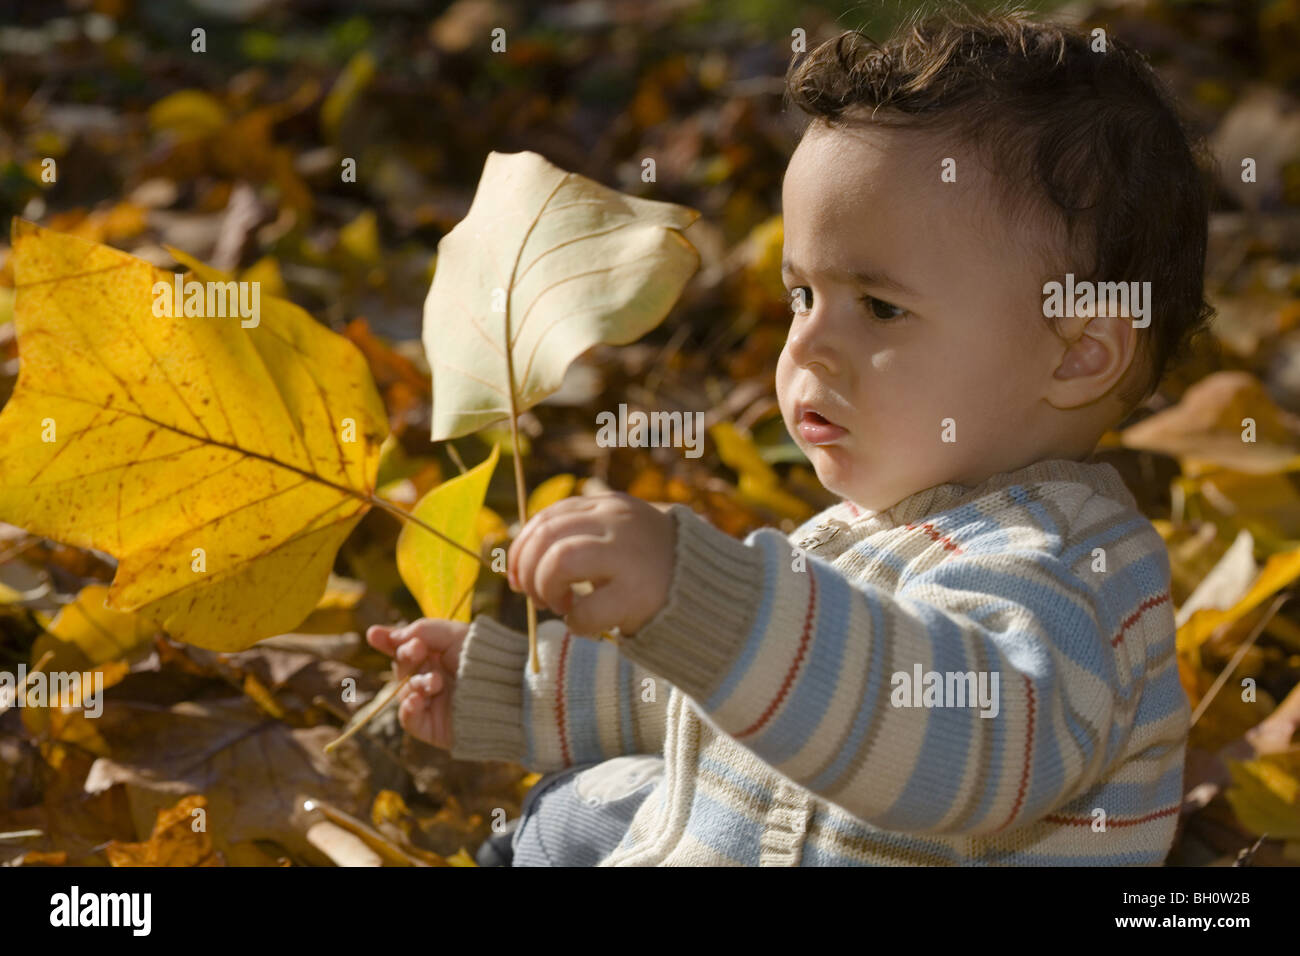 Child playing with autumn foliage, Muenchen, Bavaria, Germany Stock Photo